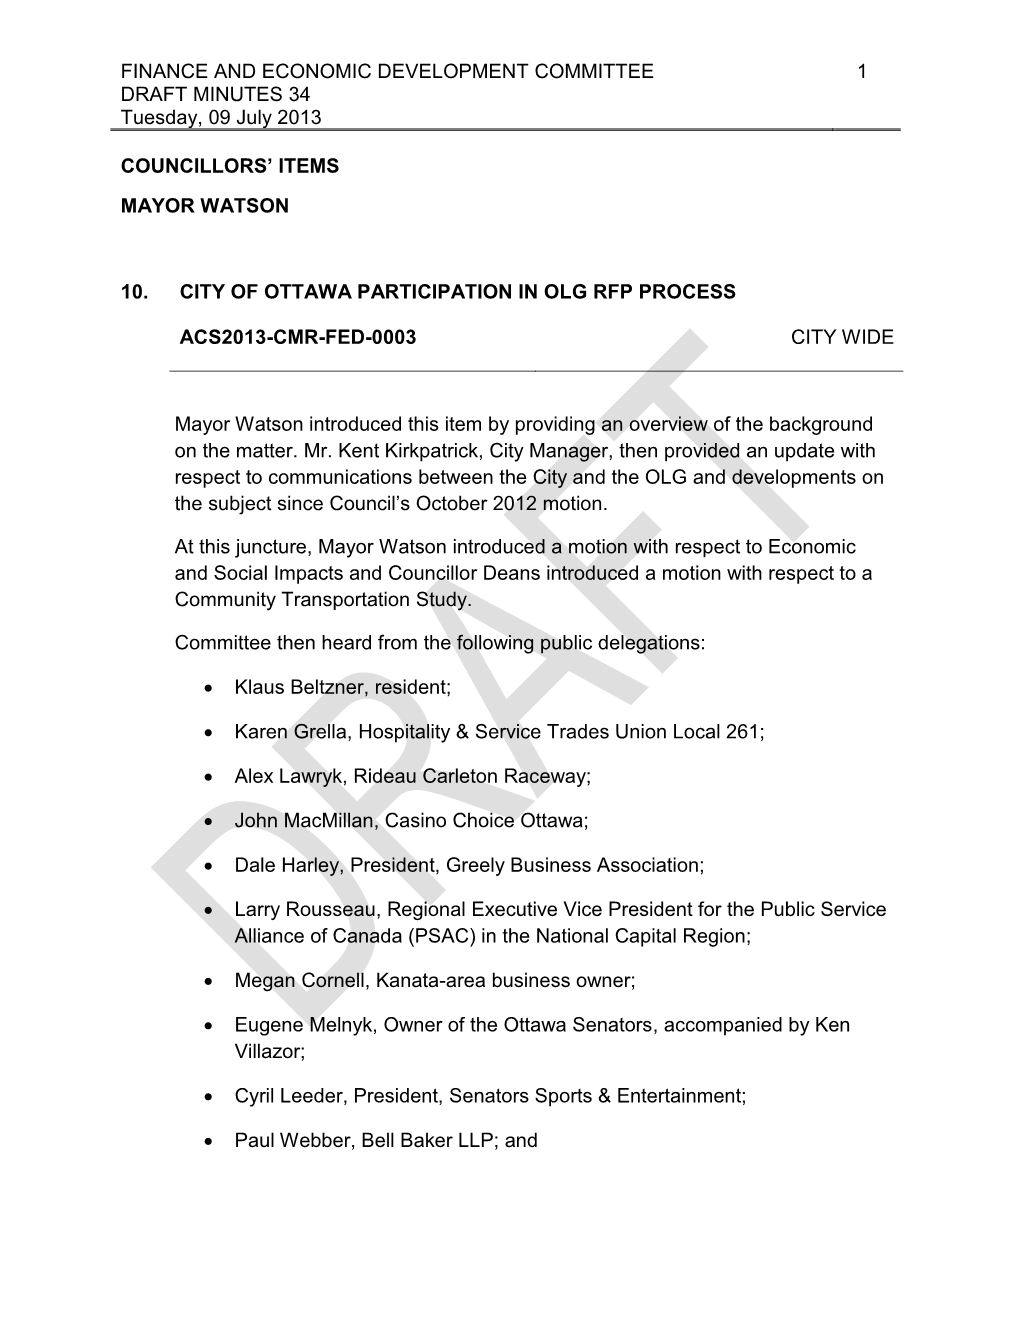 FINANCE and ECONOMIC DEVELOPMENT COMMITTEE 1 DRAFT MINUTES 34 Tuesday, 09 July 2013